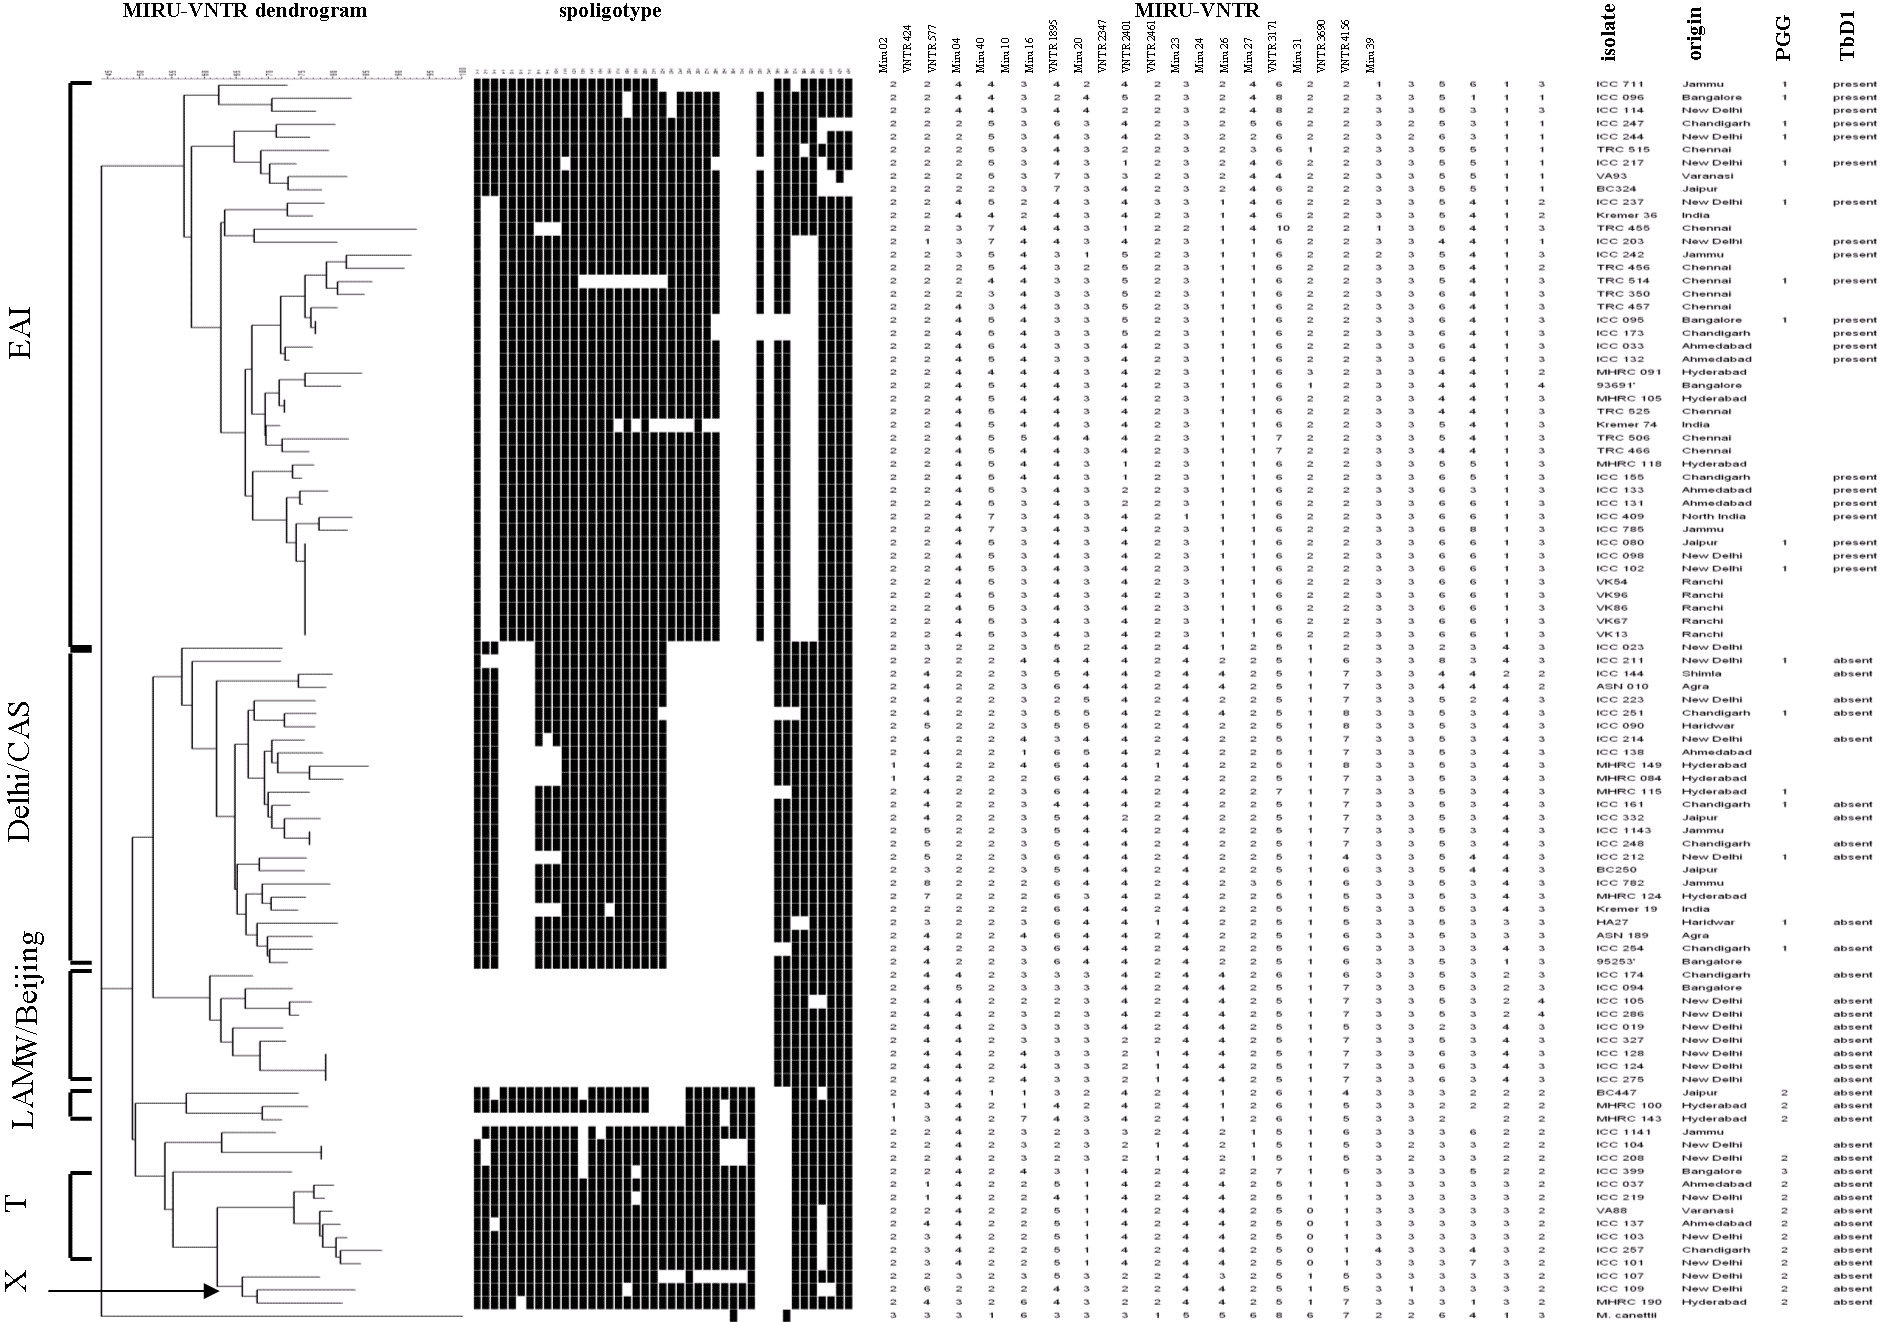 Genetic relationships of Indian Mycobacterium tuberculosis isolates. The dendrogram based on mycobacterial interspersed repetitive units–variable-number tandem repeats (MIRU-VNTR) genotypes, generated by using the neighbor-joining algorithm, was rooted with M. canettii, the most divergent member of the M. tuberculosis complex. Corresponding spoligotypes of the TbD1+/EAI isolates, additional genogroups, principal genetic group (PGG), and M. tuberculosis–specific deletion region 1 (TbD1) status ar